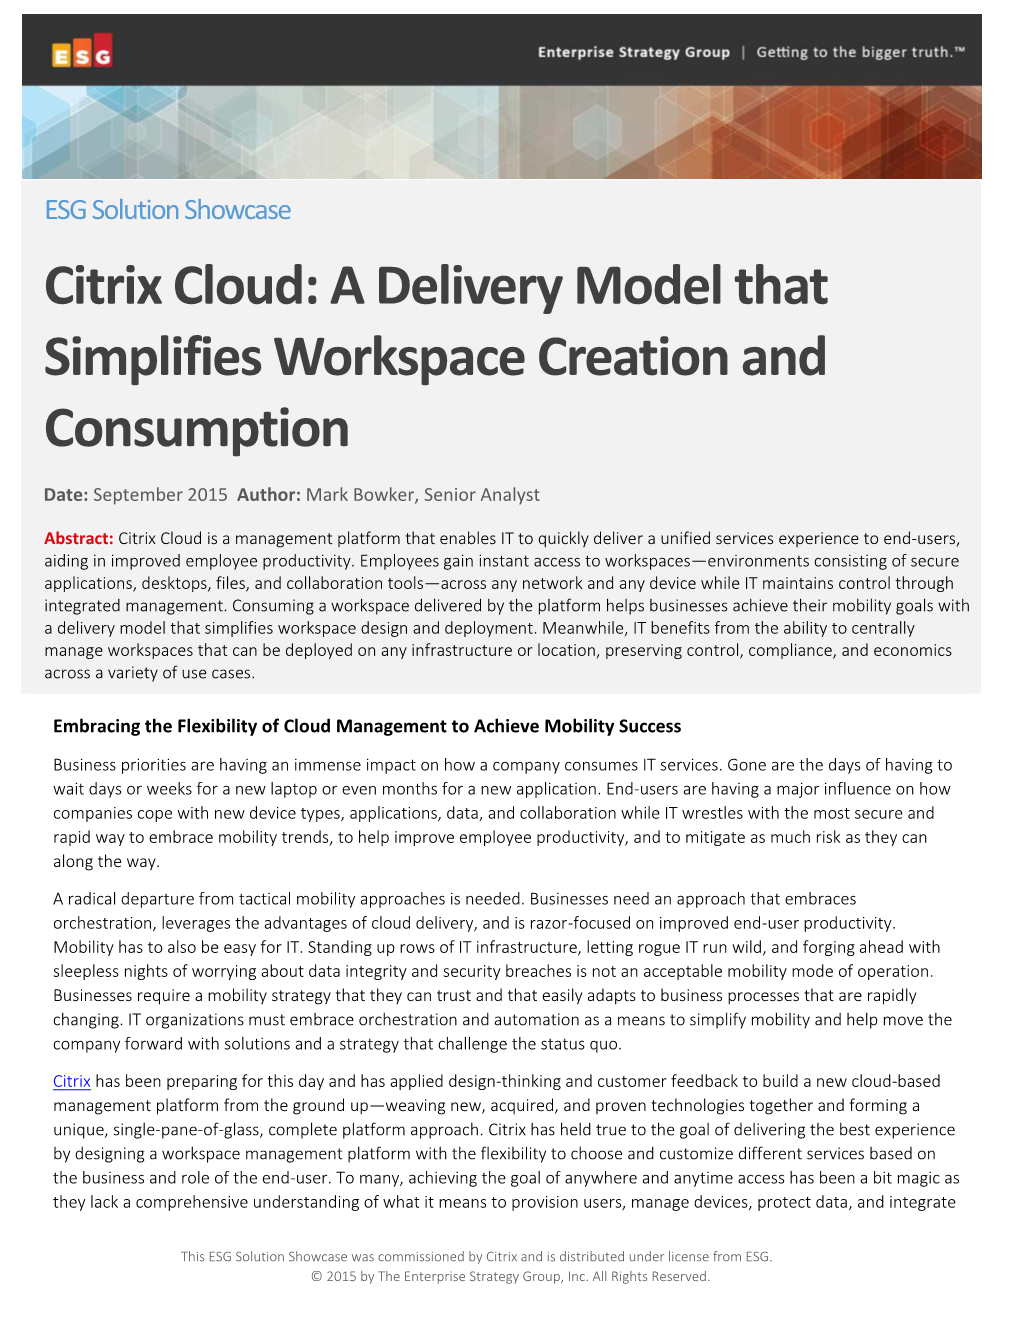 Citrix Cloud: a Delivery Model That Simplifies Workspace Creation and Consumption